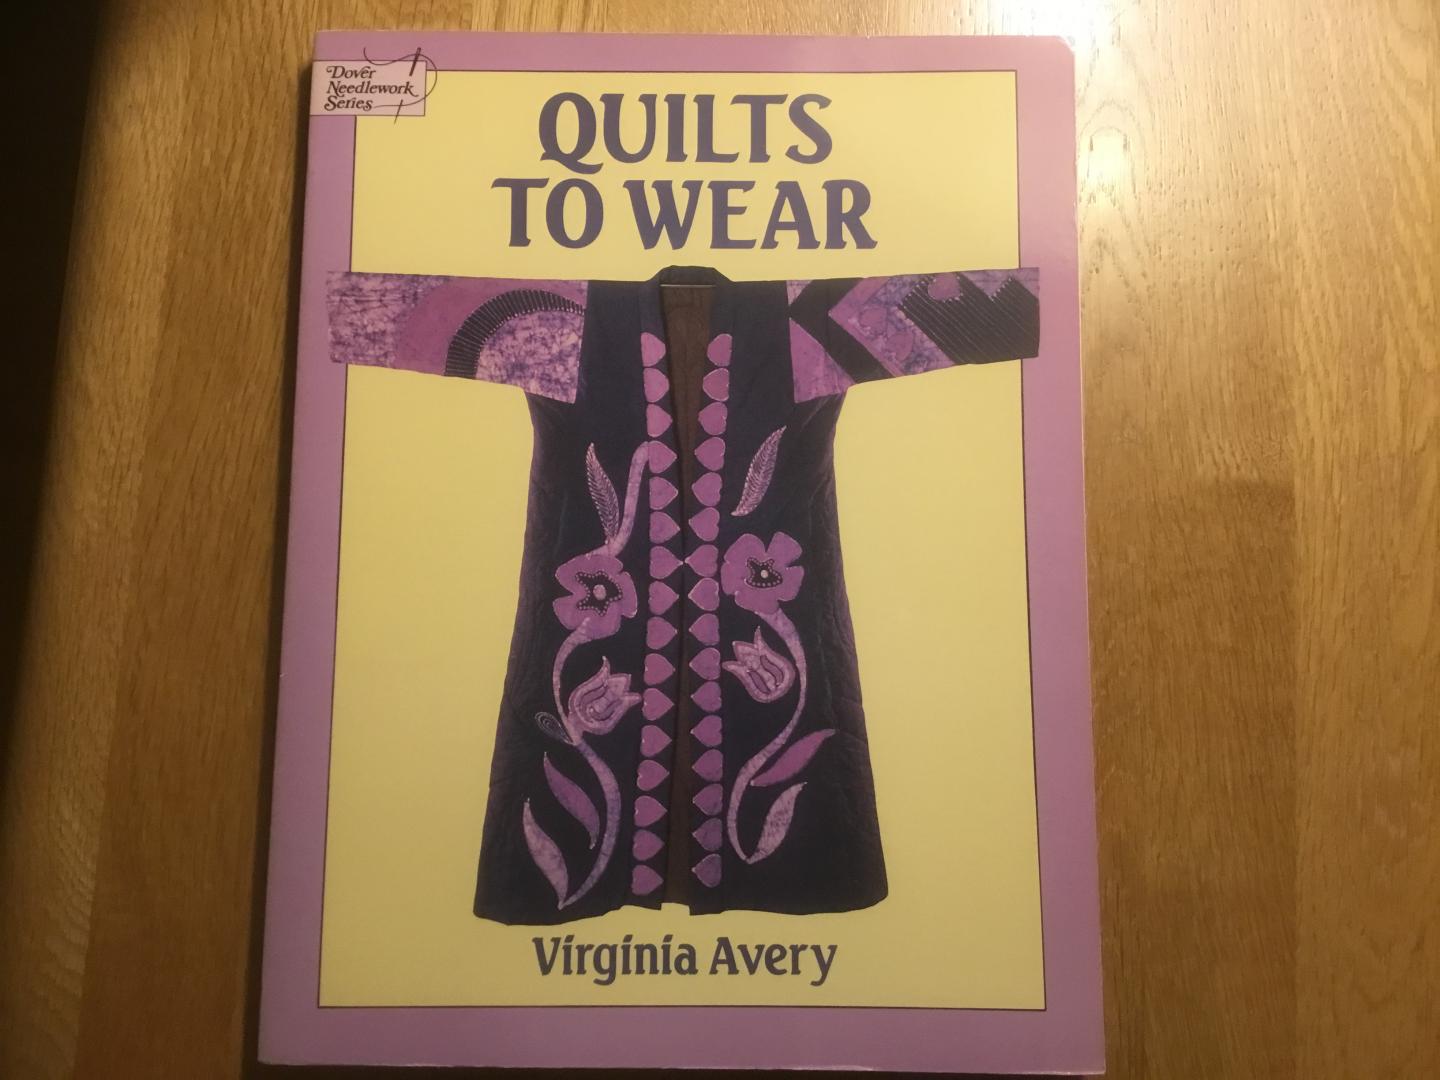 Avery Virginia - Quilts to wear